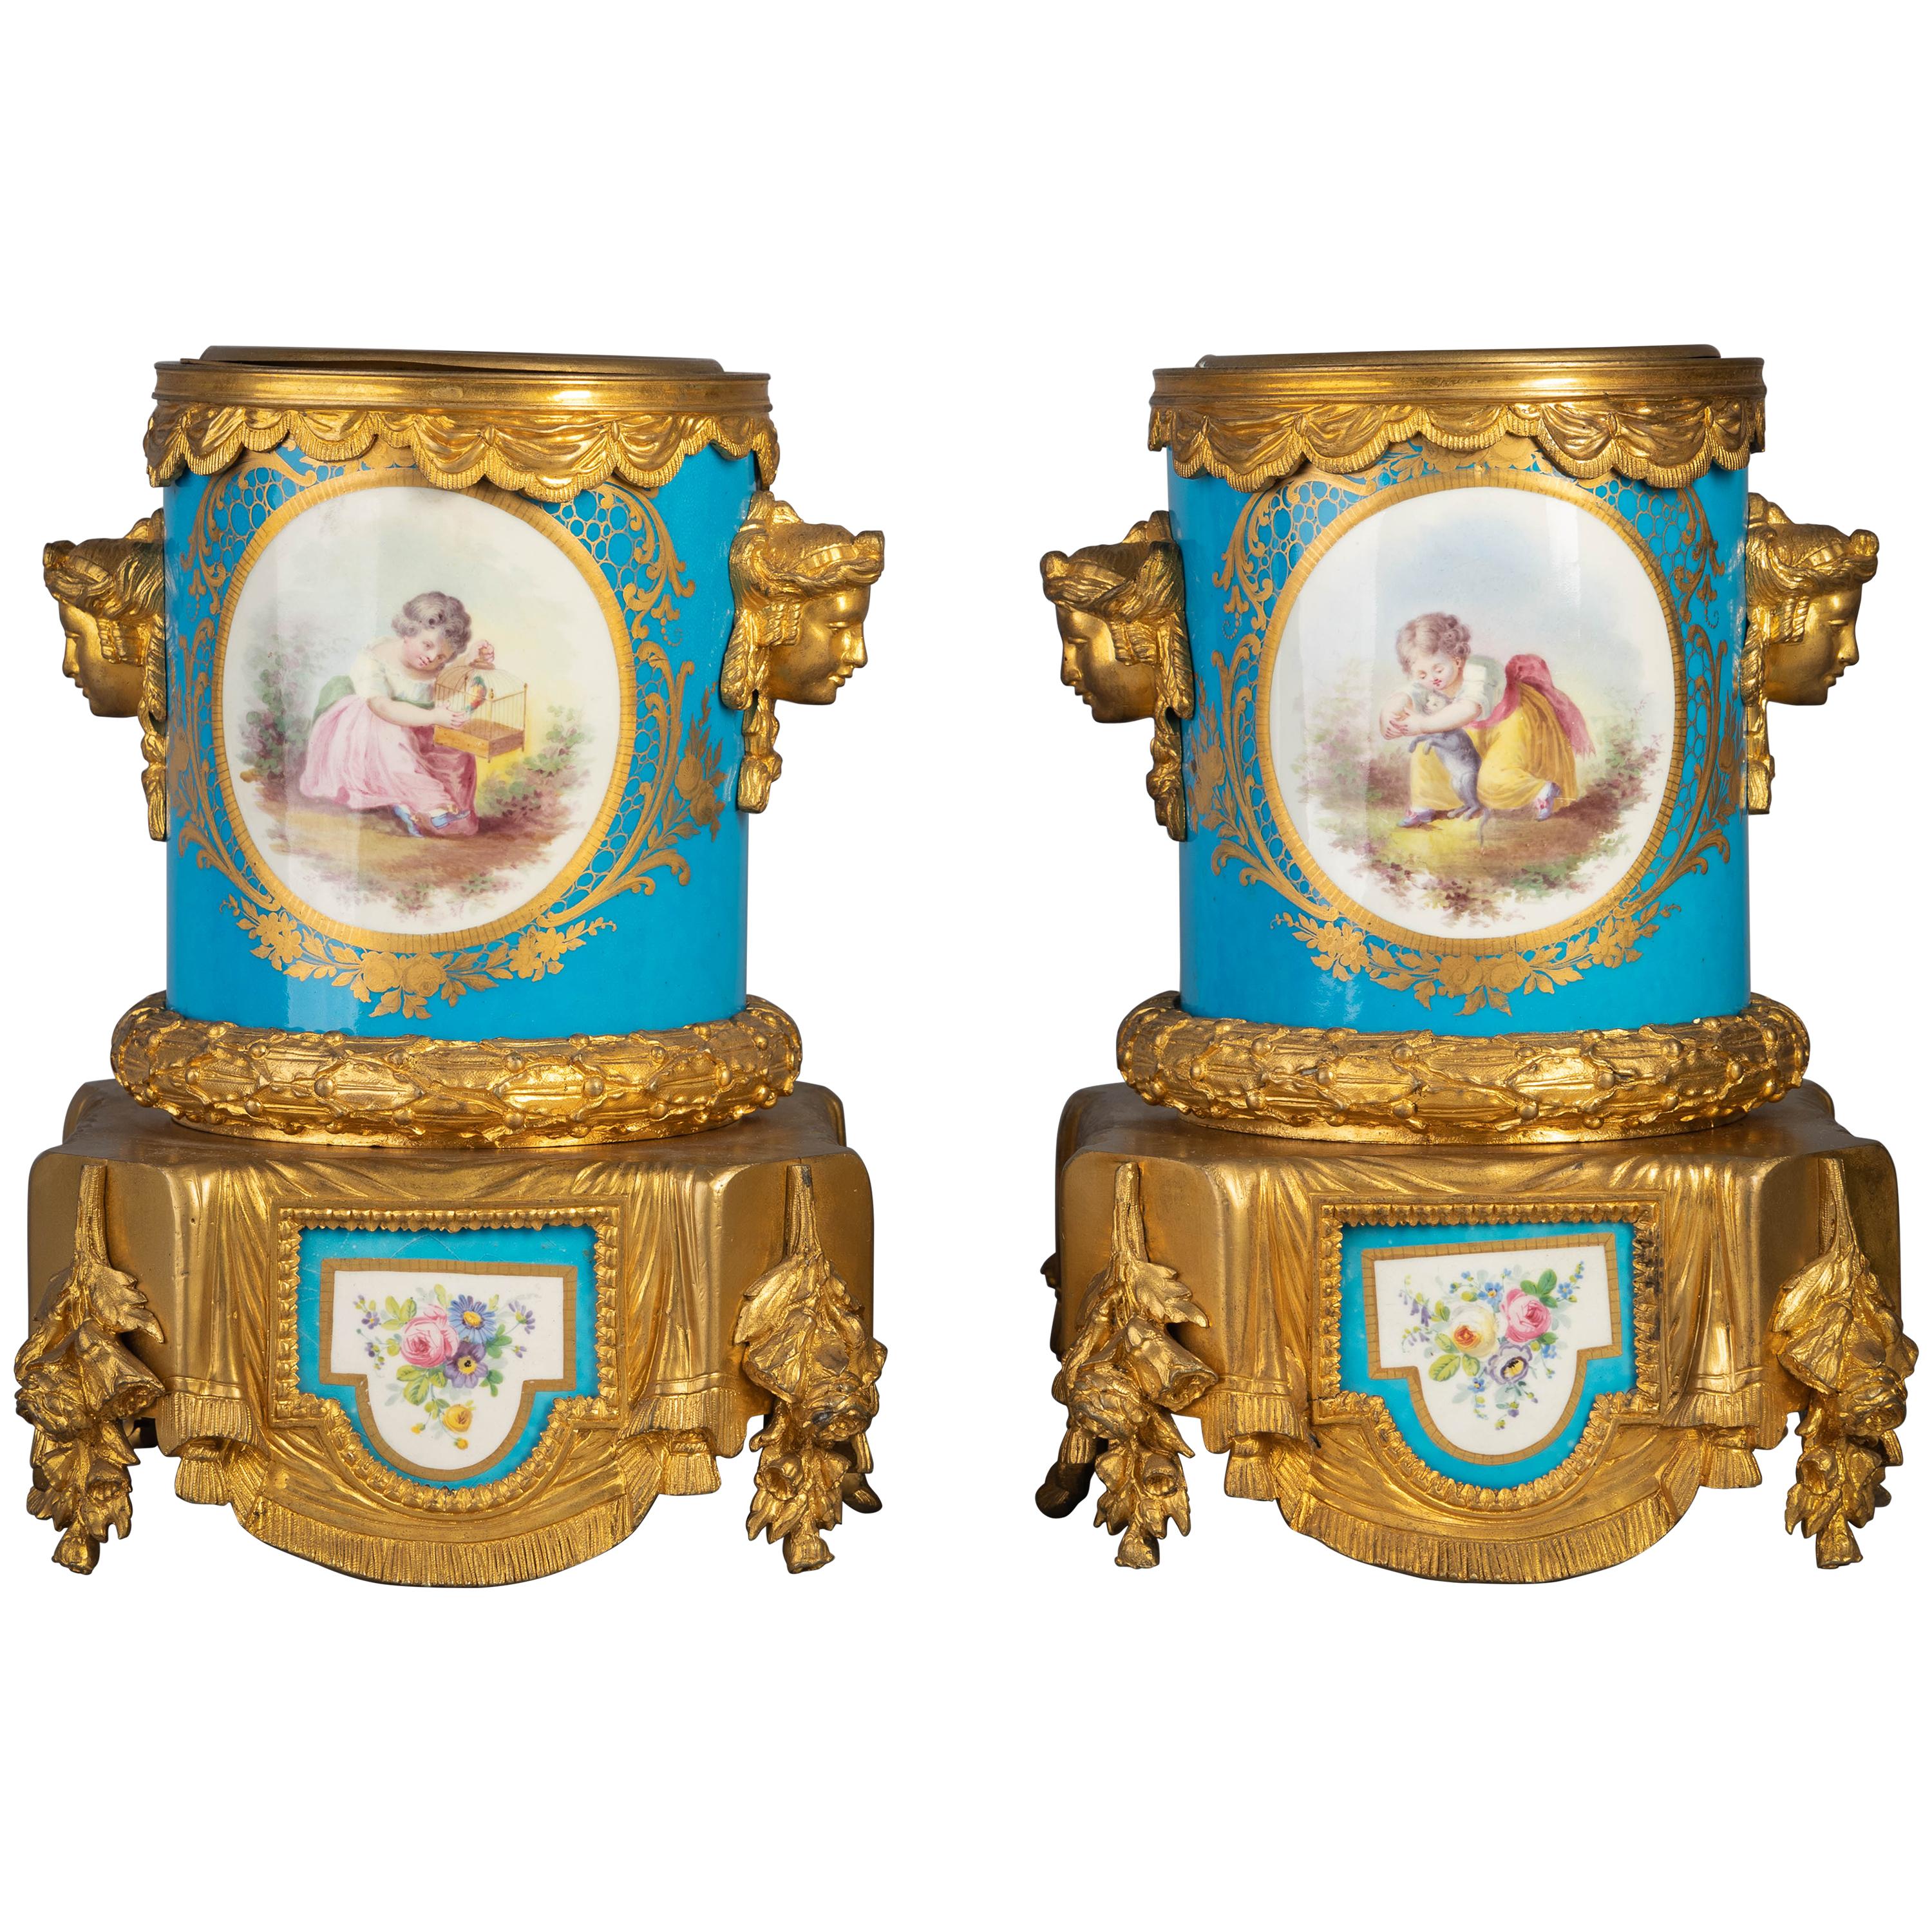 Pair of Gilt Bronze Mounted 'Sevres' Porcelain Wine Coolers, circa 1880